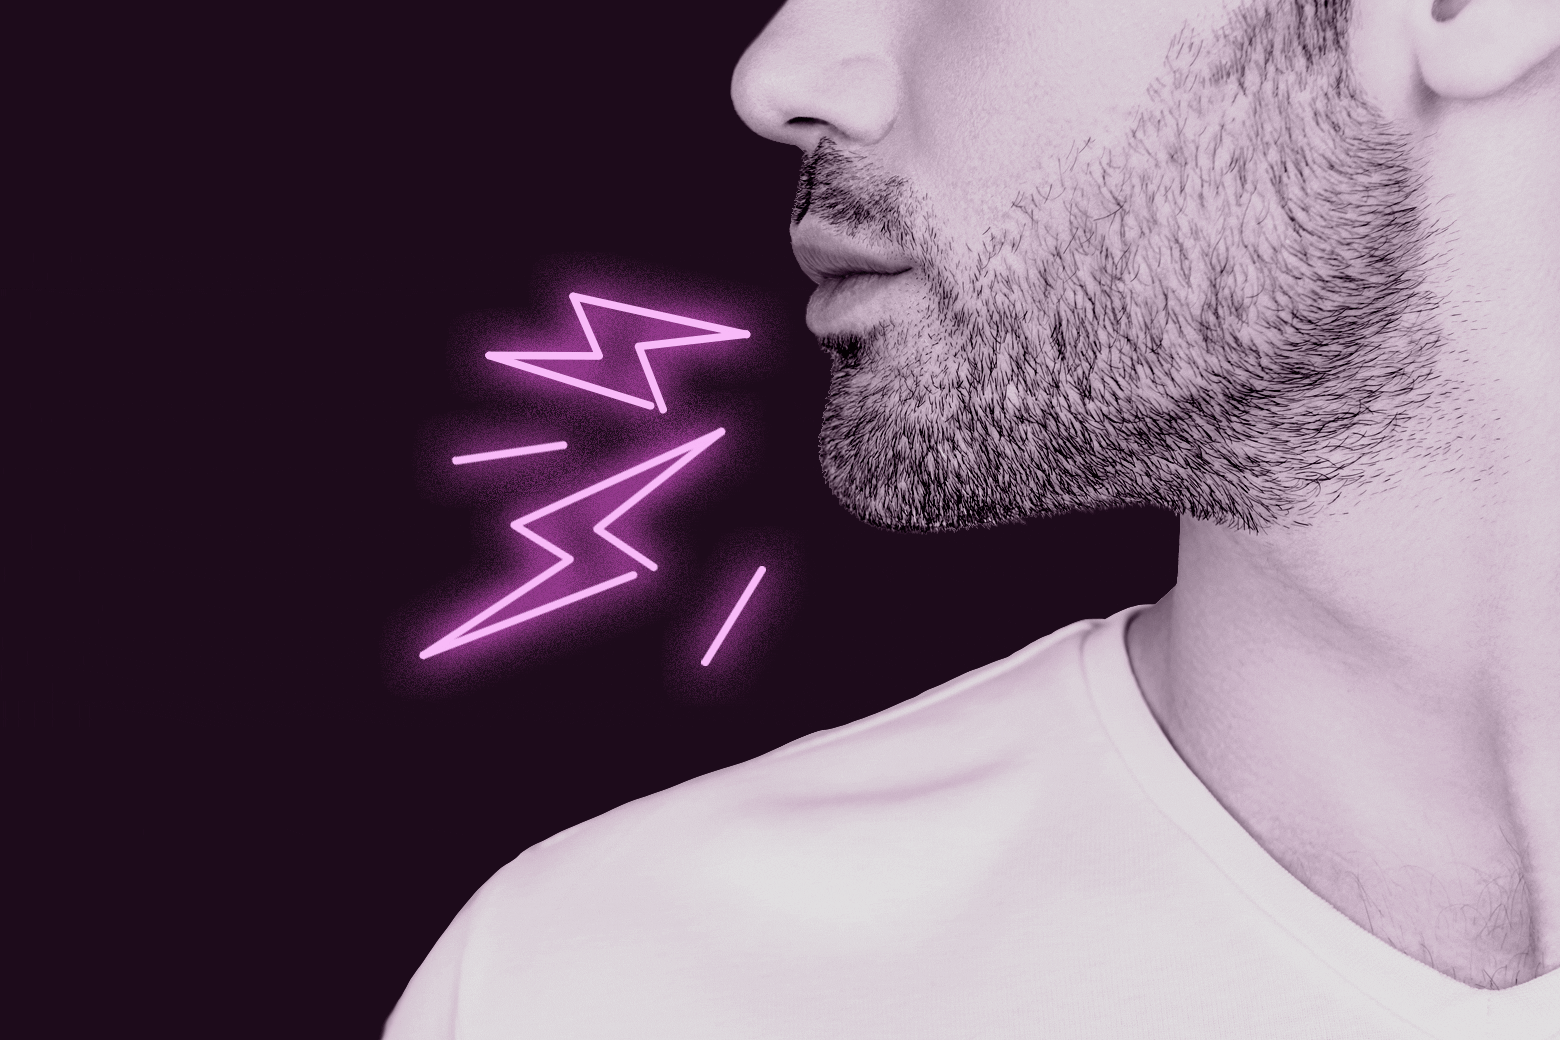 Man with stubble next to some neon shocks pointed at his chin.